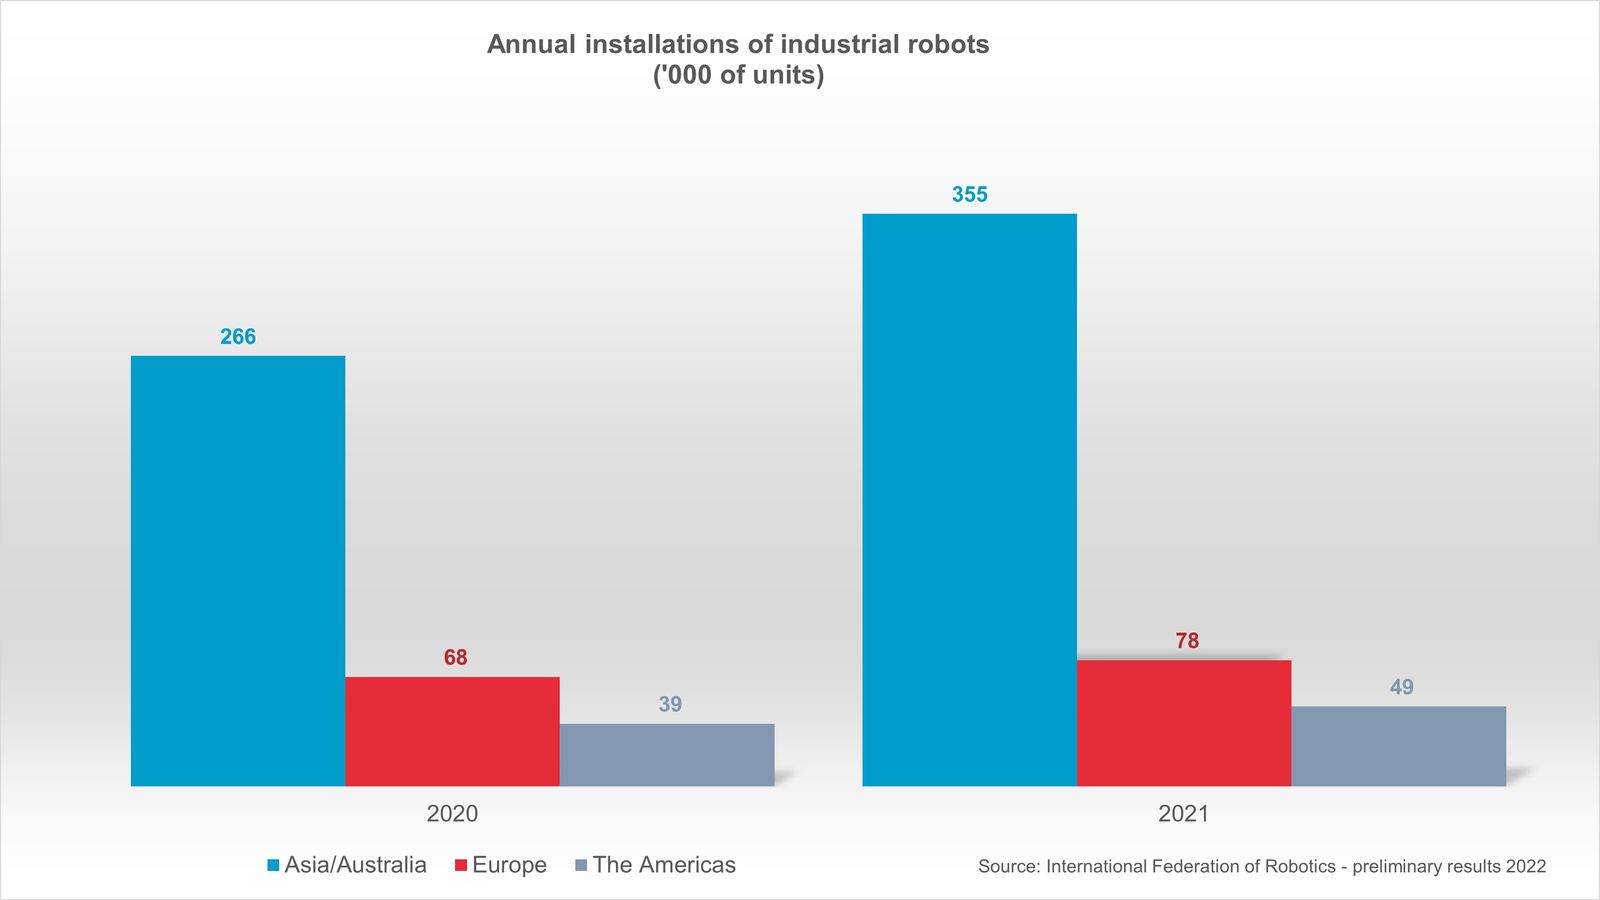 Preliminary annual installations 2021 compared to 2020 by region - source: International Federation of Robotics